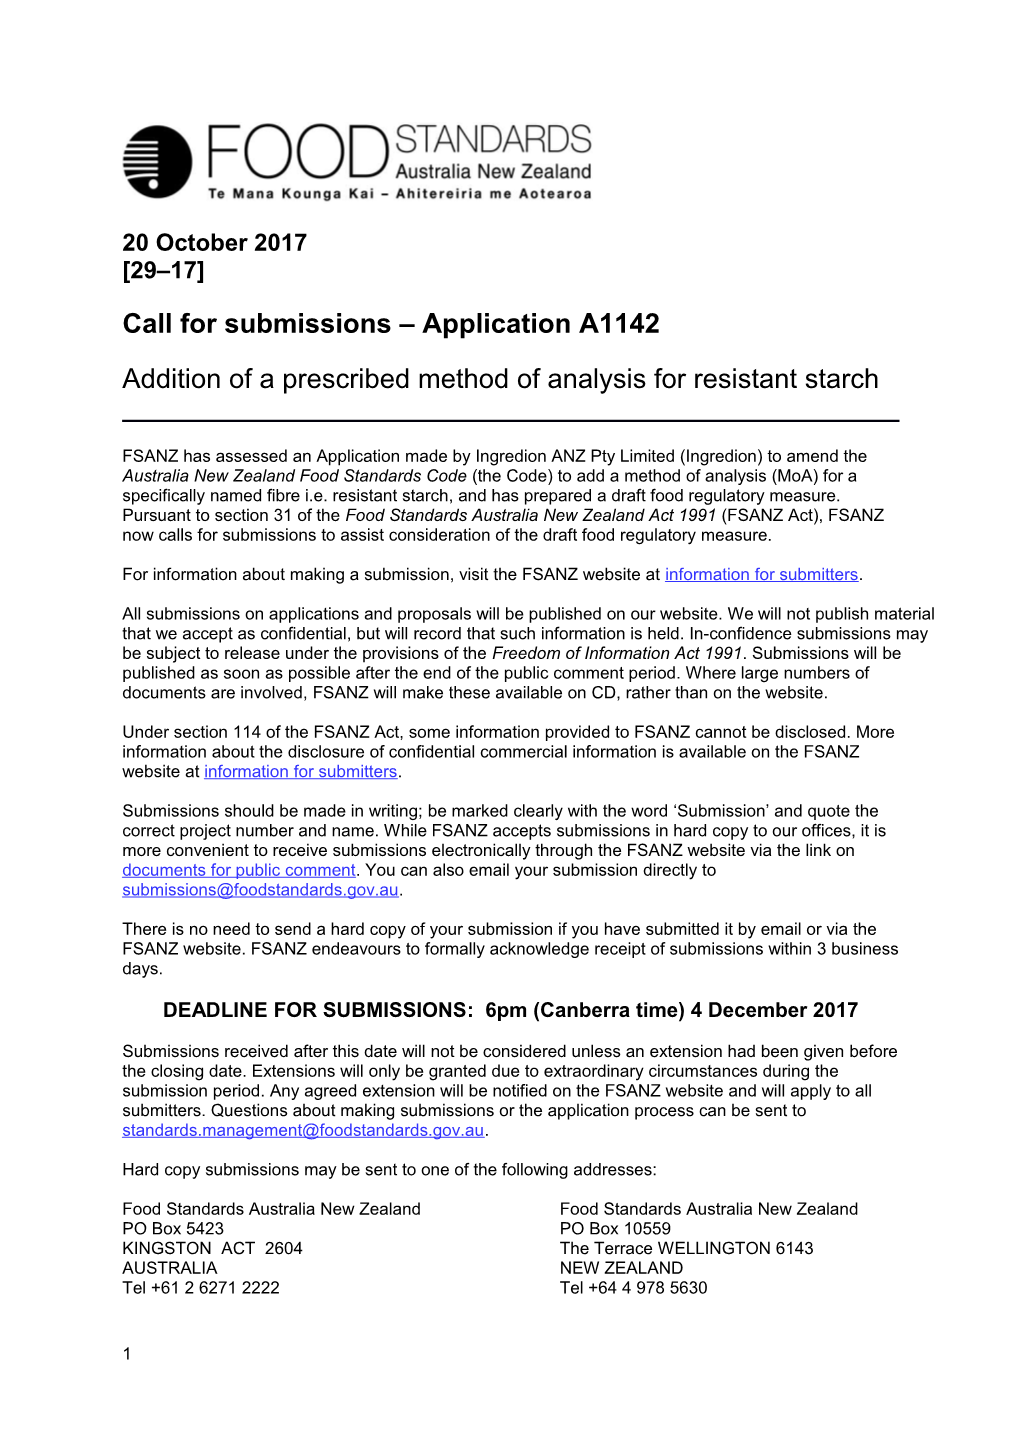 Callforsubmissions Application A1142